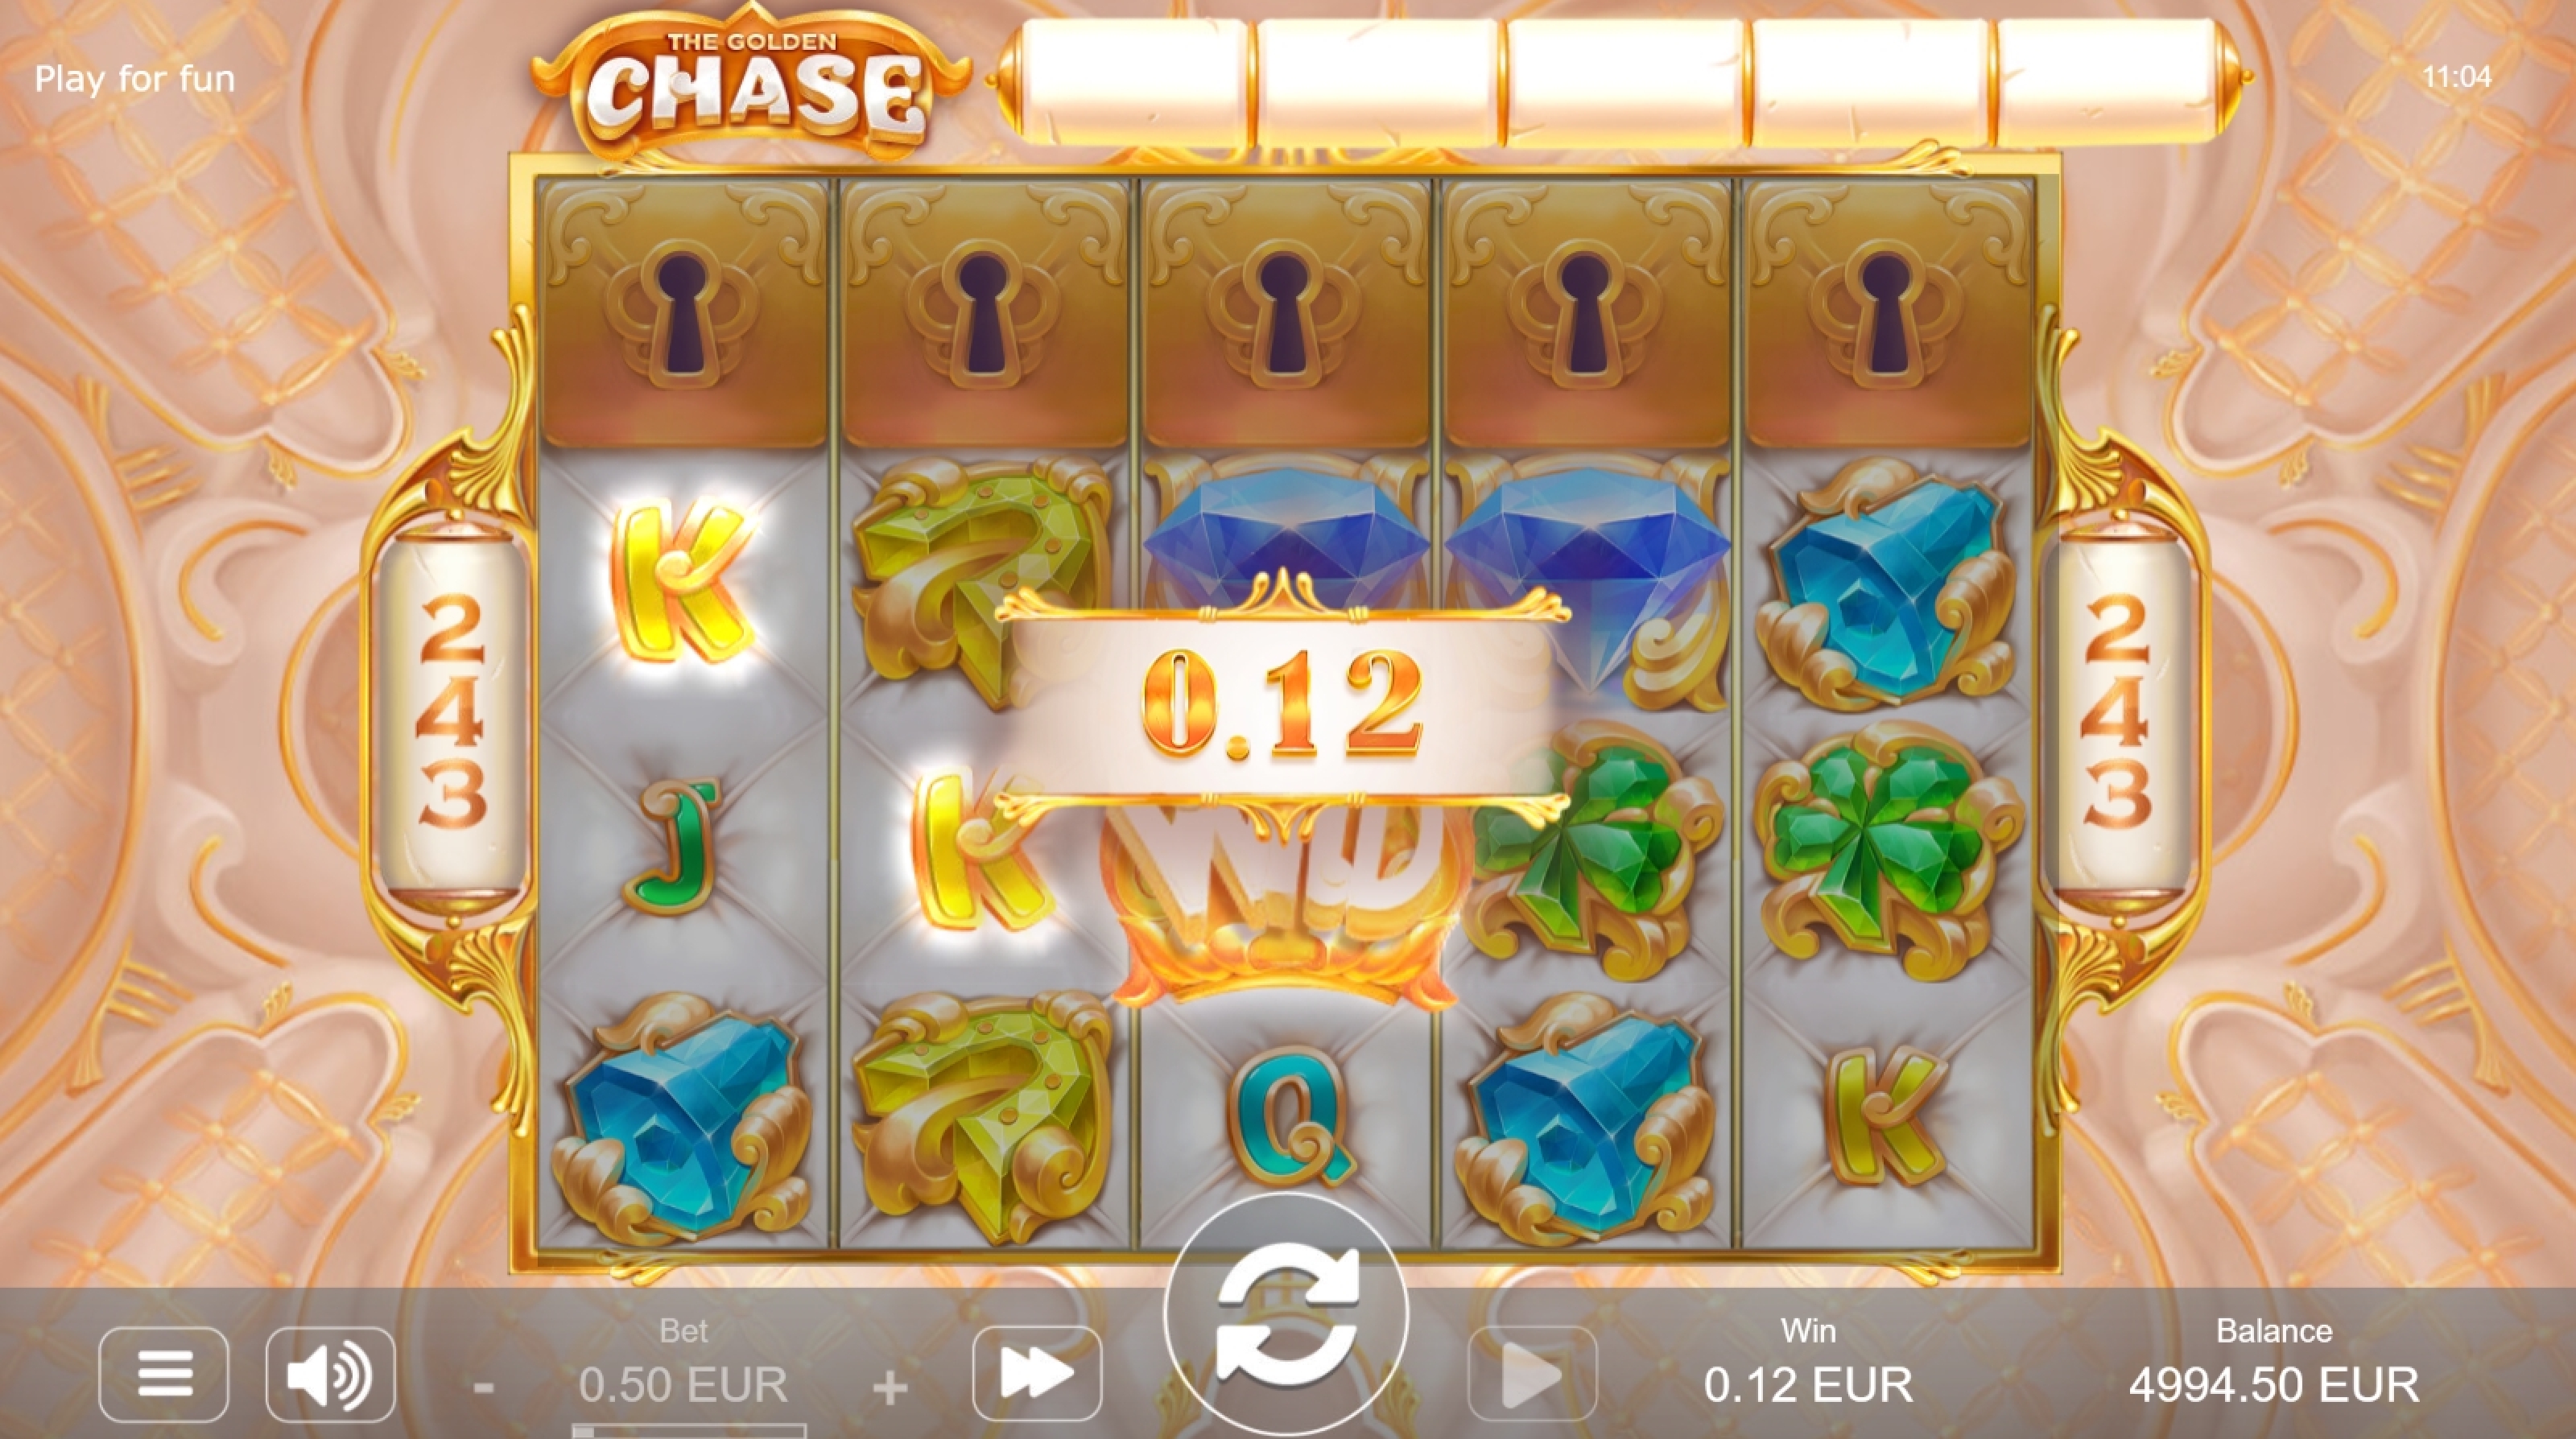 Win Money in The Golden Chase Free Slot Game by STHLM Gaming